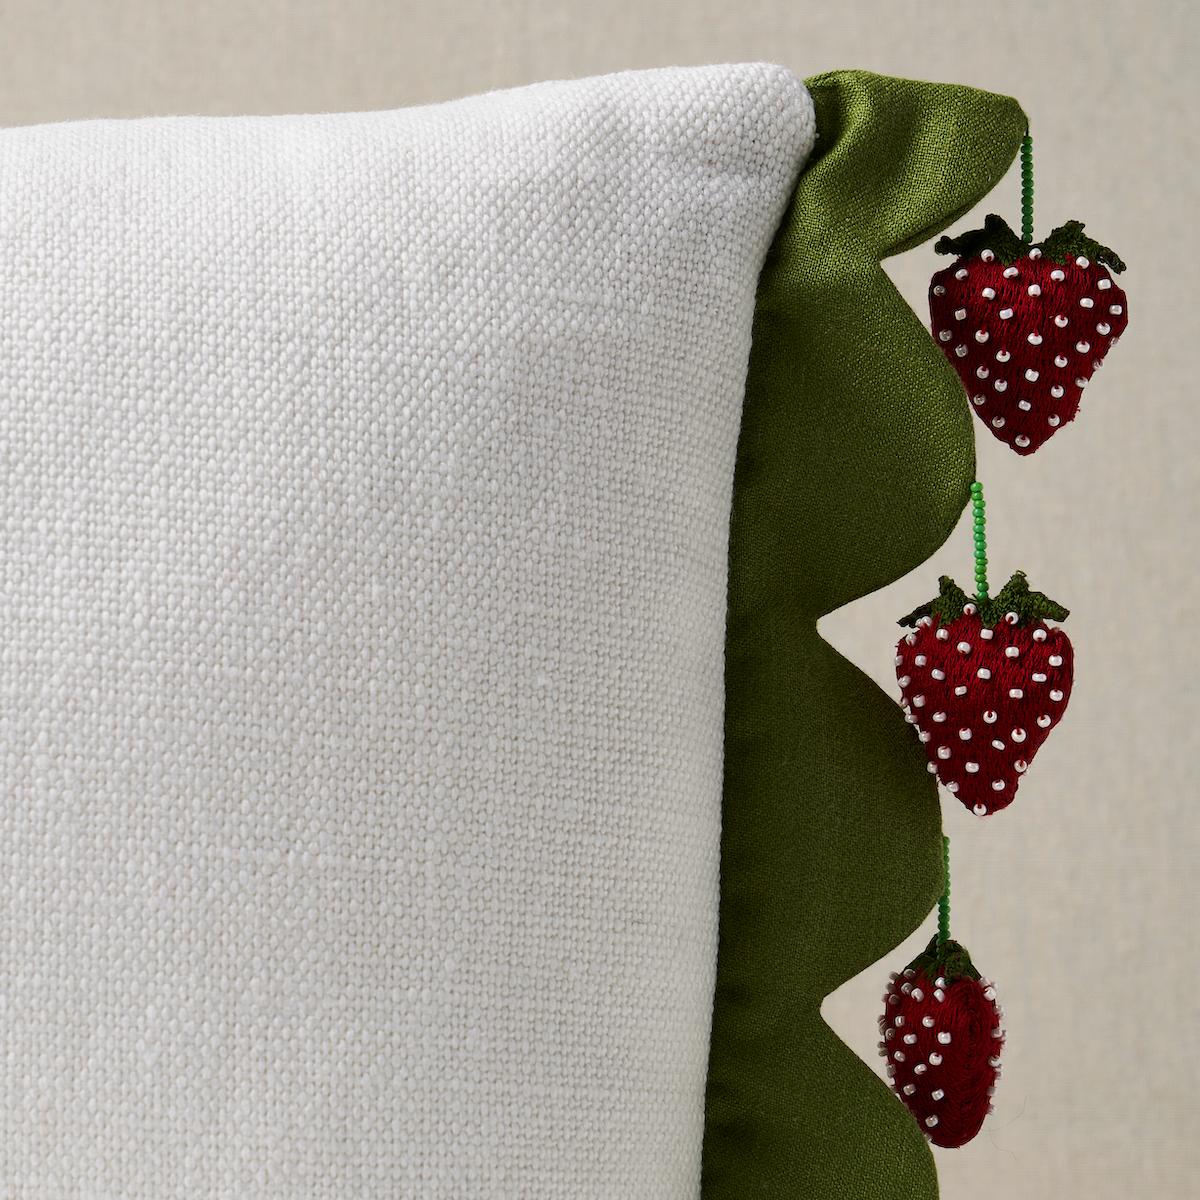 This pillow features Strawberry Jam Trim by Johnson Hartig for Schumacher with a knife edge finish on top and bottom. Strawberry Jam Trim in green is a whimsical handmade design created in collaboration with Johnson Hartig. Body of pillow is Piet